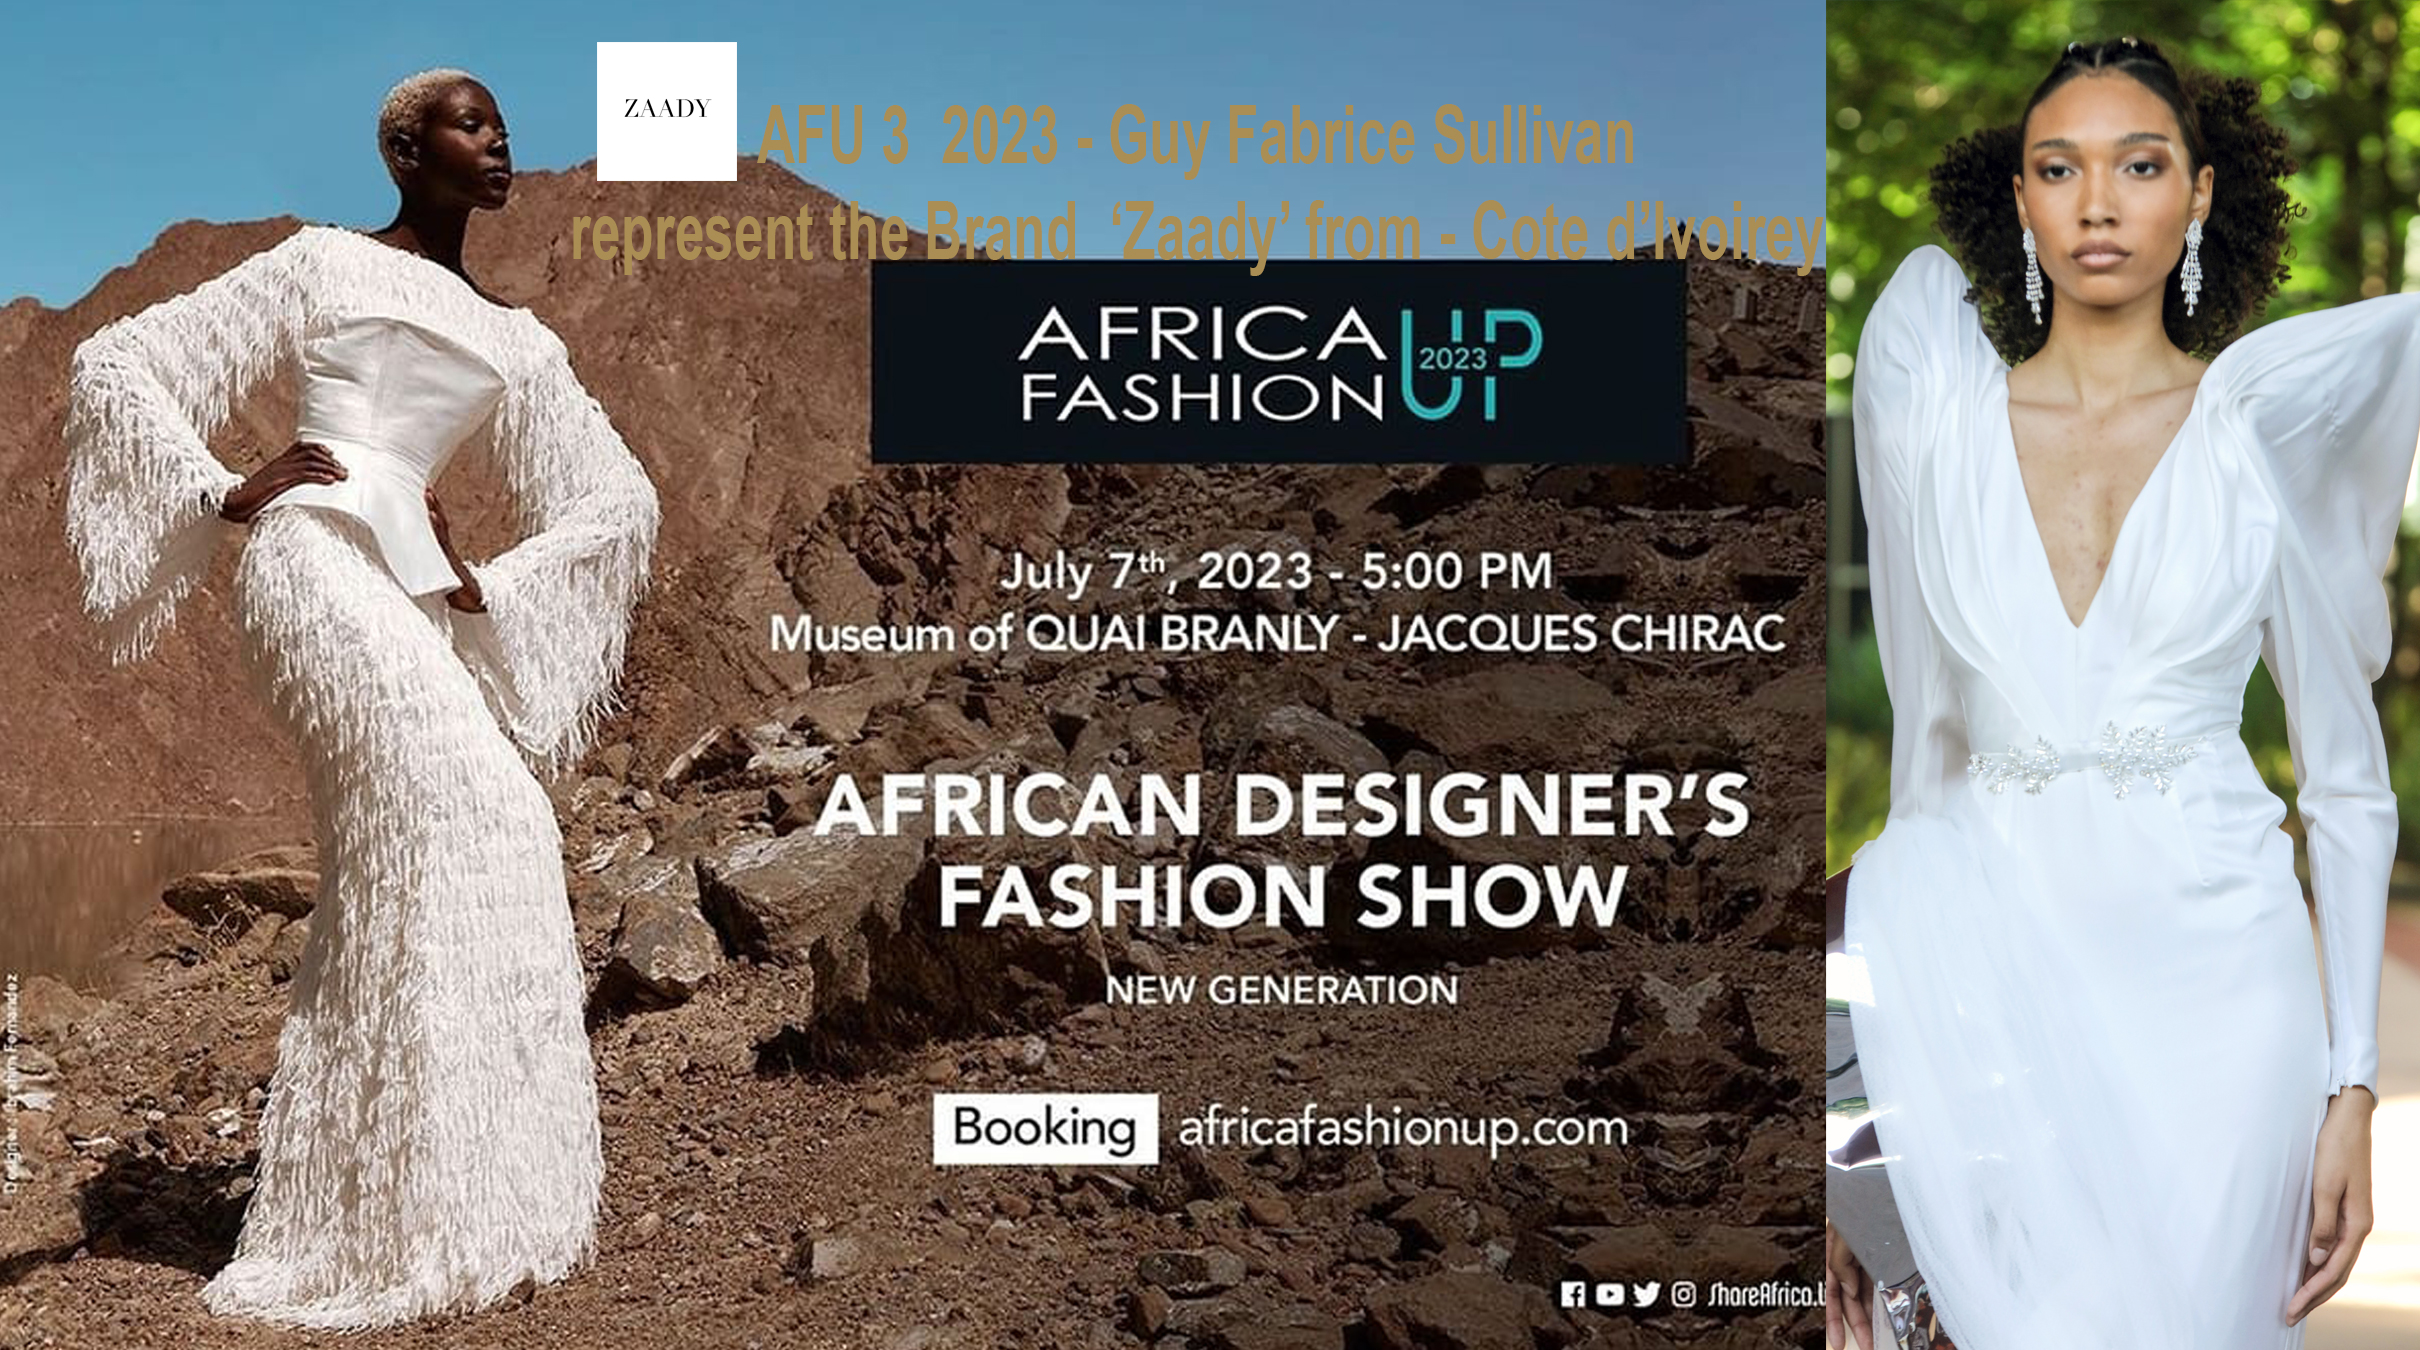 AFRICA-VOGUE-COVER-AFU-3 -2023-Guy-Fabrice-Sullivan-represent-the-Brand -Zaady-from-Côte-d’Ivoire-Winners-of-the-inaugural-Edition-2021-Guest-Designer-of-AFU-3rd-Edition-DN-AFRICA-Media-Partener